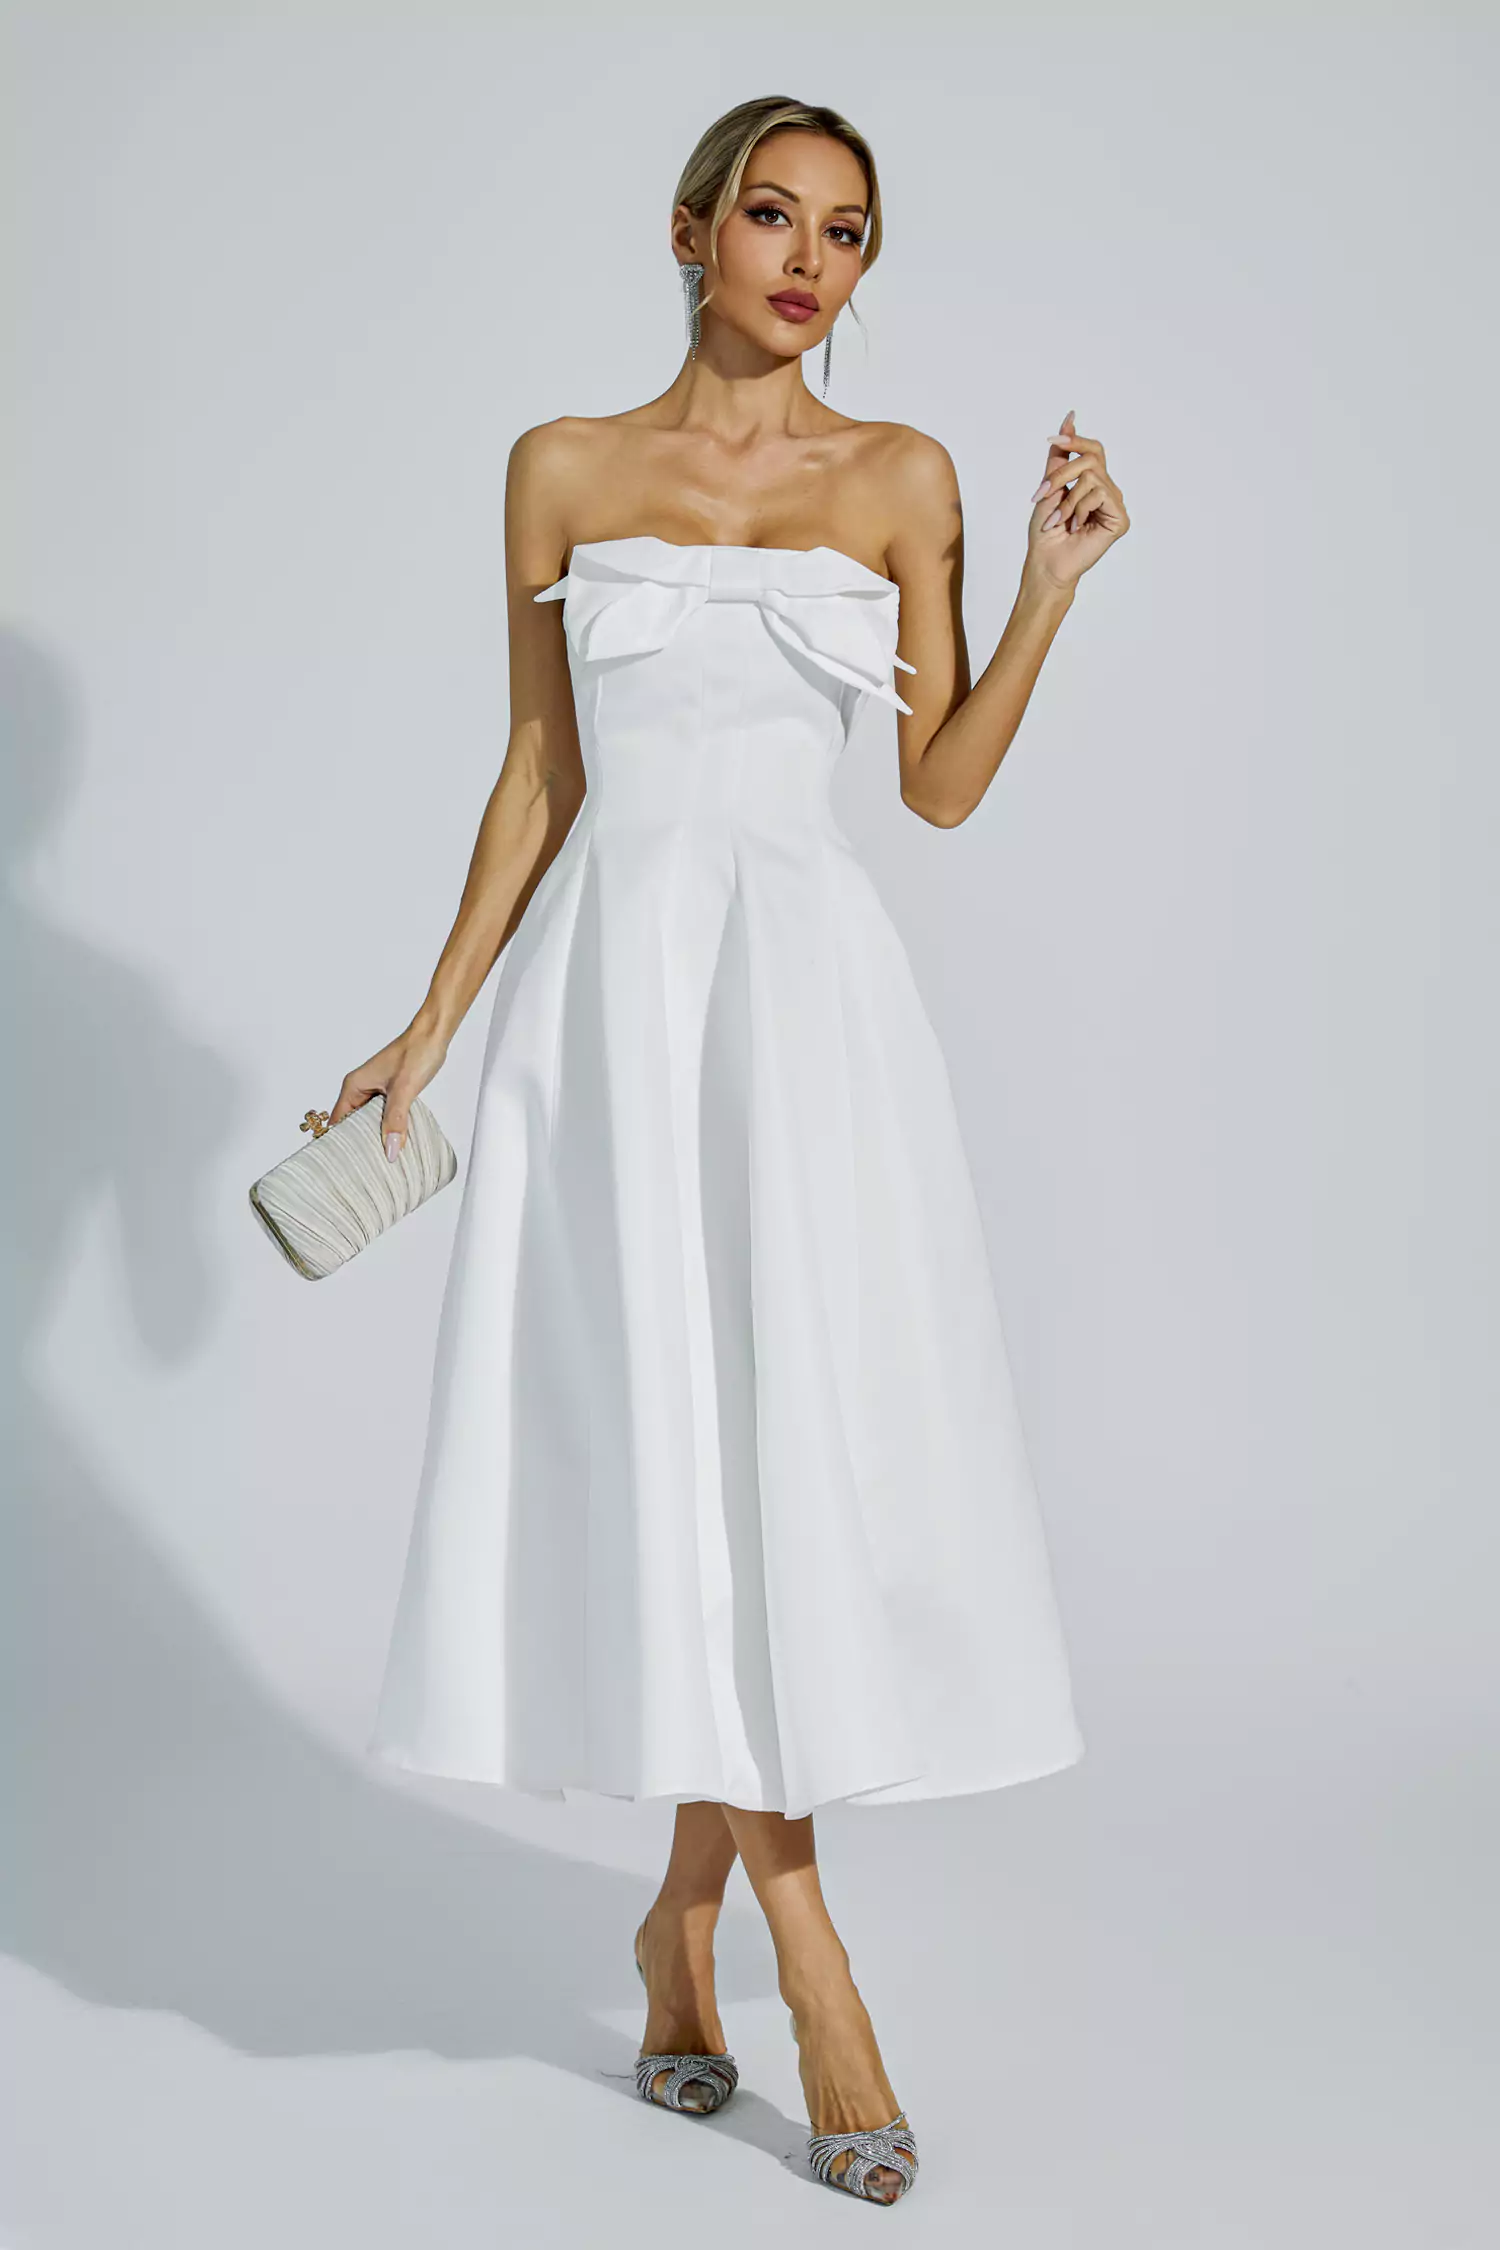 Andi White Bow Off Shoulder Dress